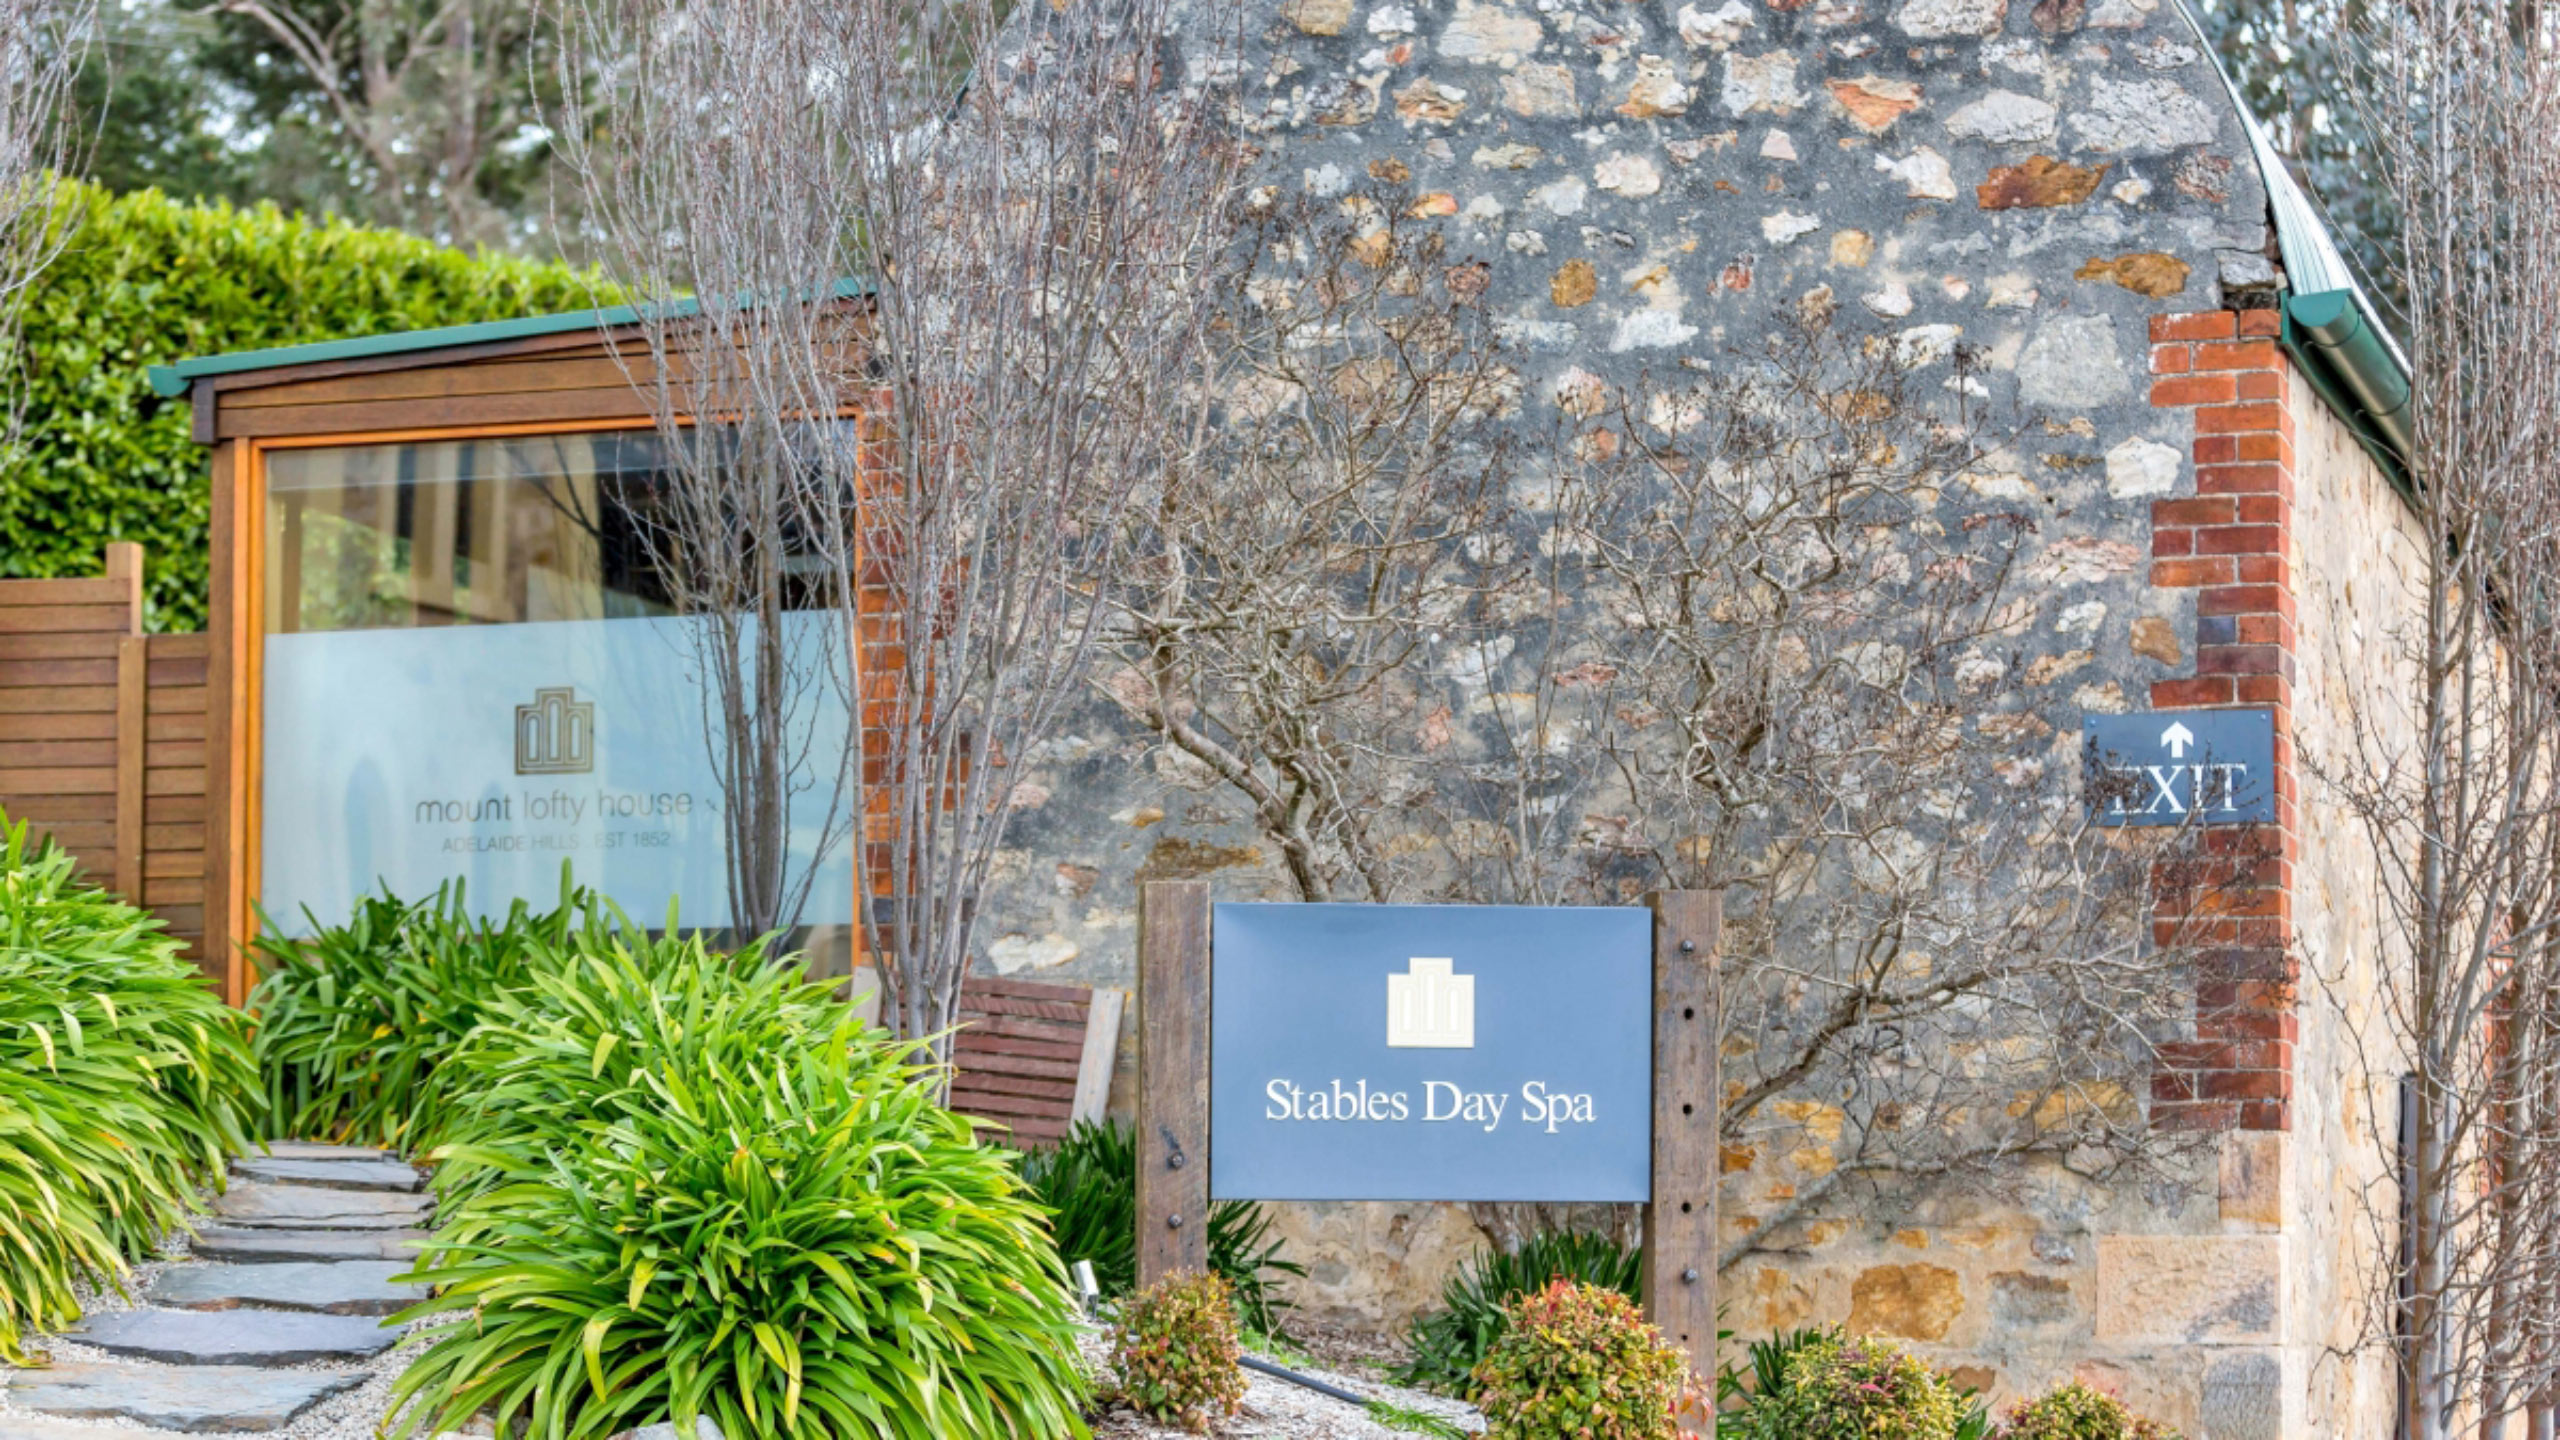 mt-lofty-house-adelaide-Stables-Day-SPa-outside